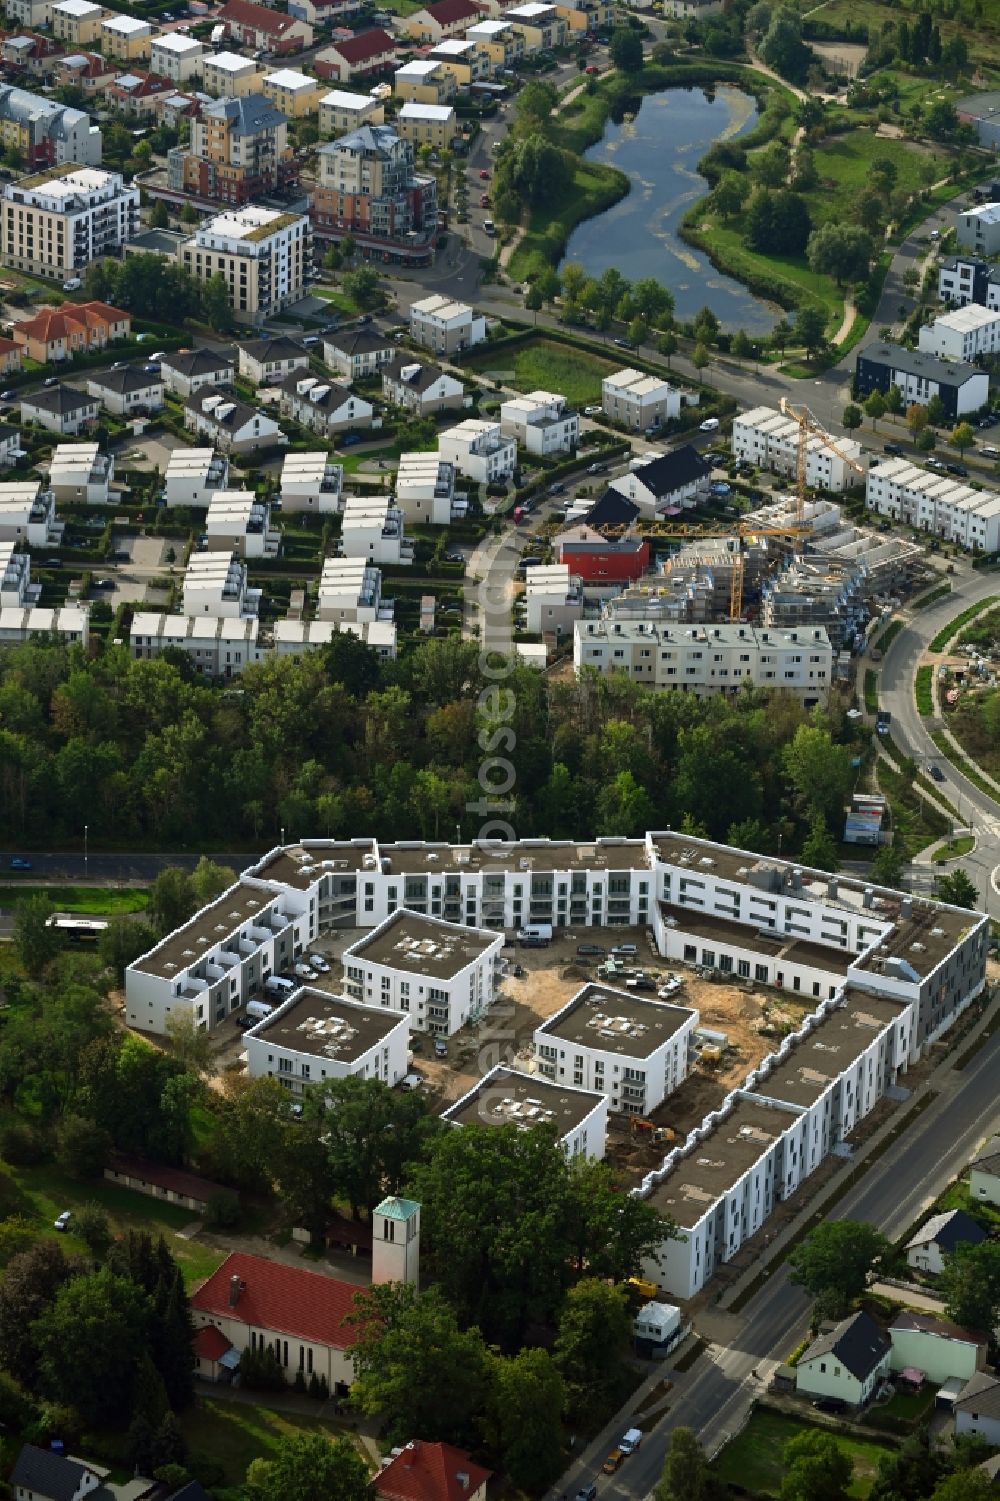 Aerial image Teltow - Construction site to build a new multi-family residential complex Quartier on Kirchplatz on Ruhlsdorfer Strasse in Teltow in the state Brandenburg, Germany